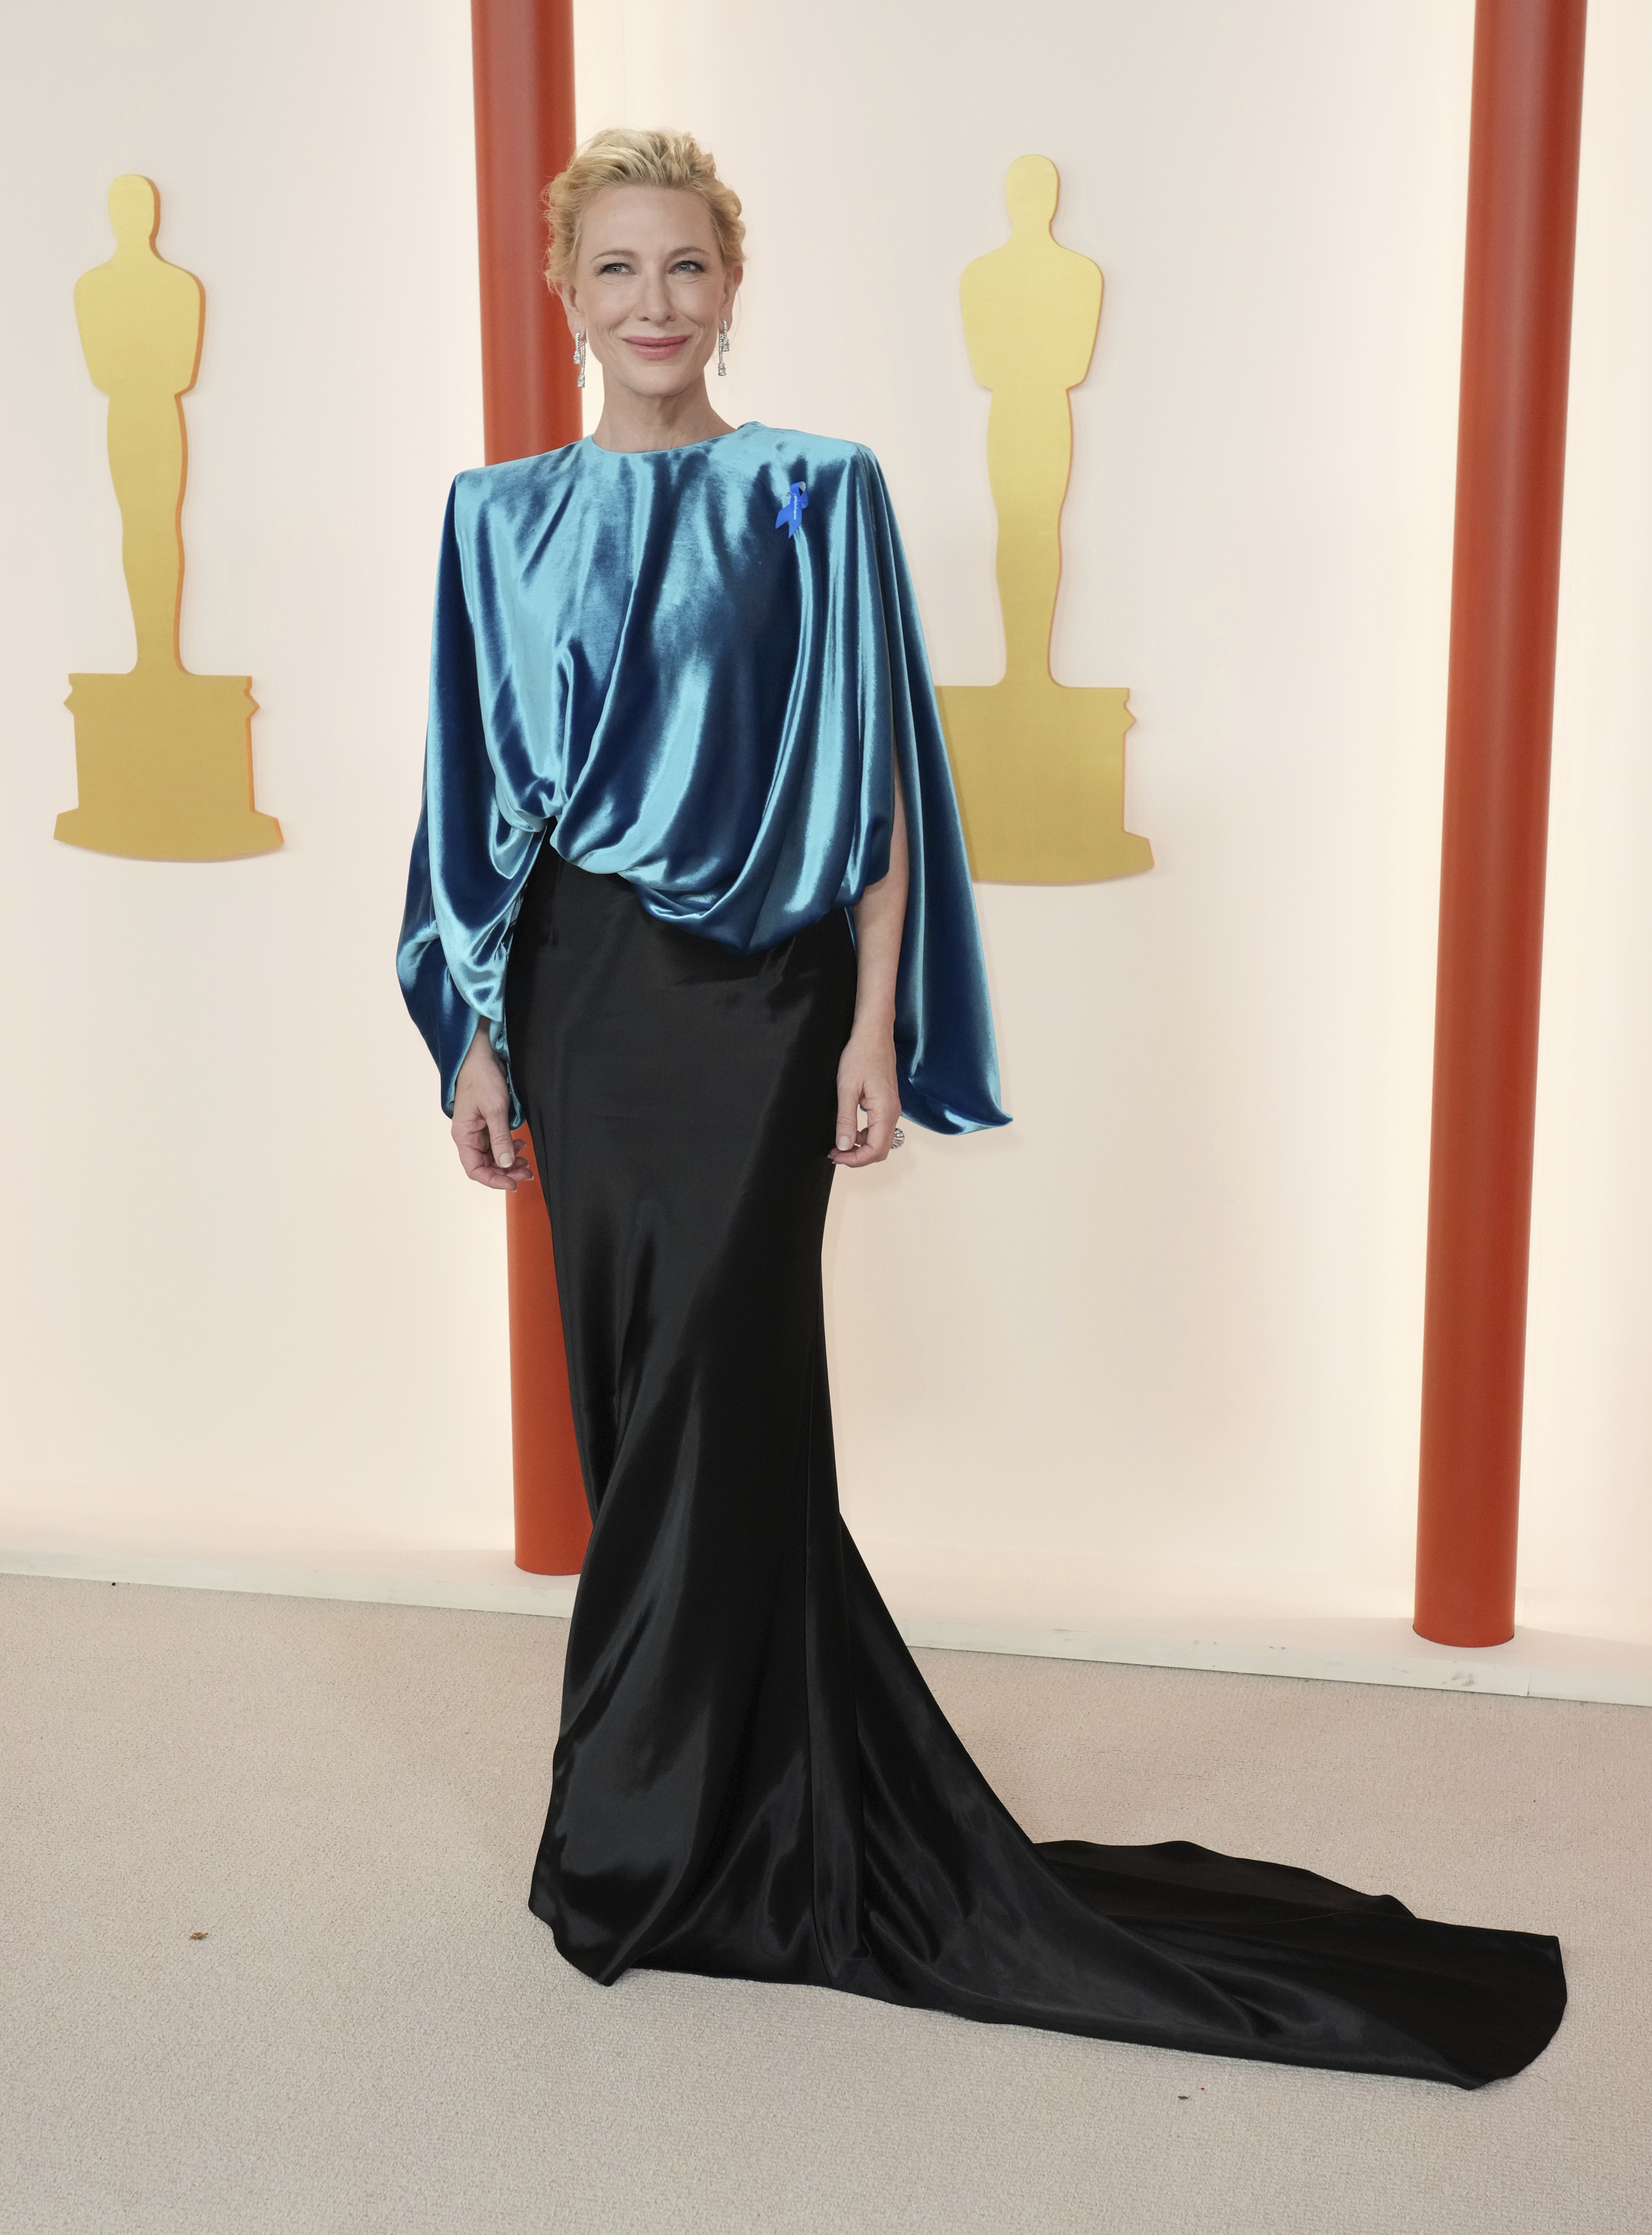 Cate Blanchett wearing a long-sleeved silk blue top with a slim-fitting black skirt with a long train